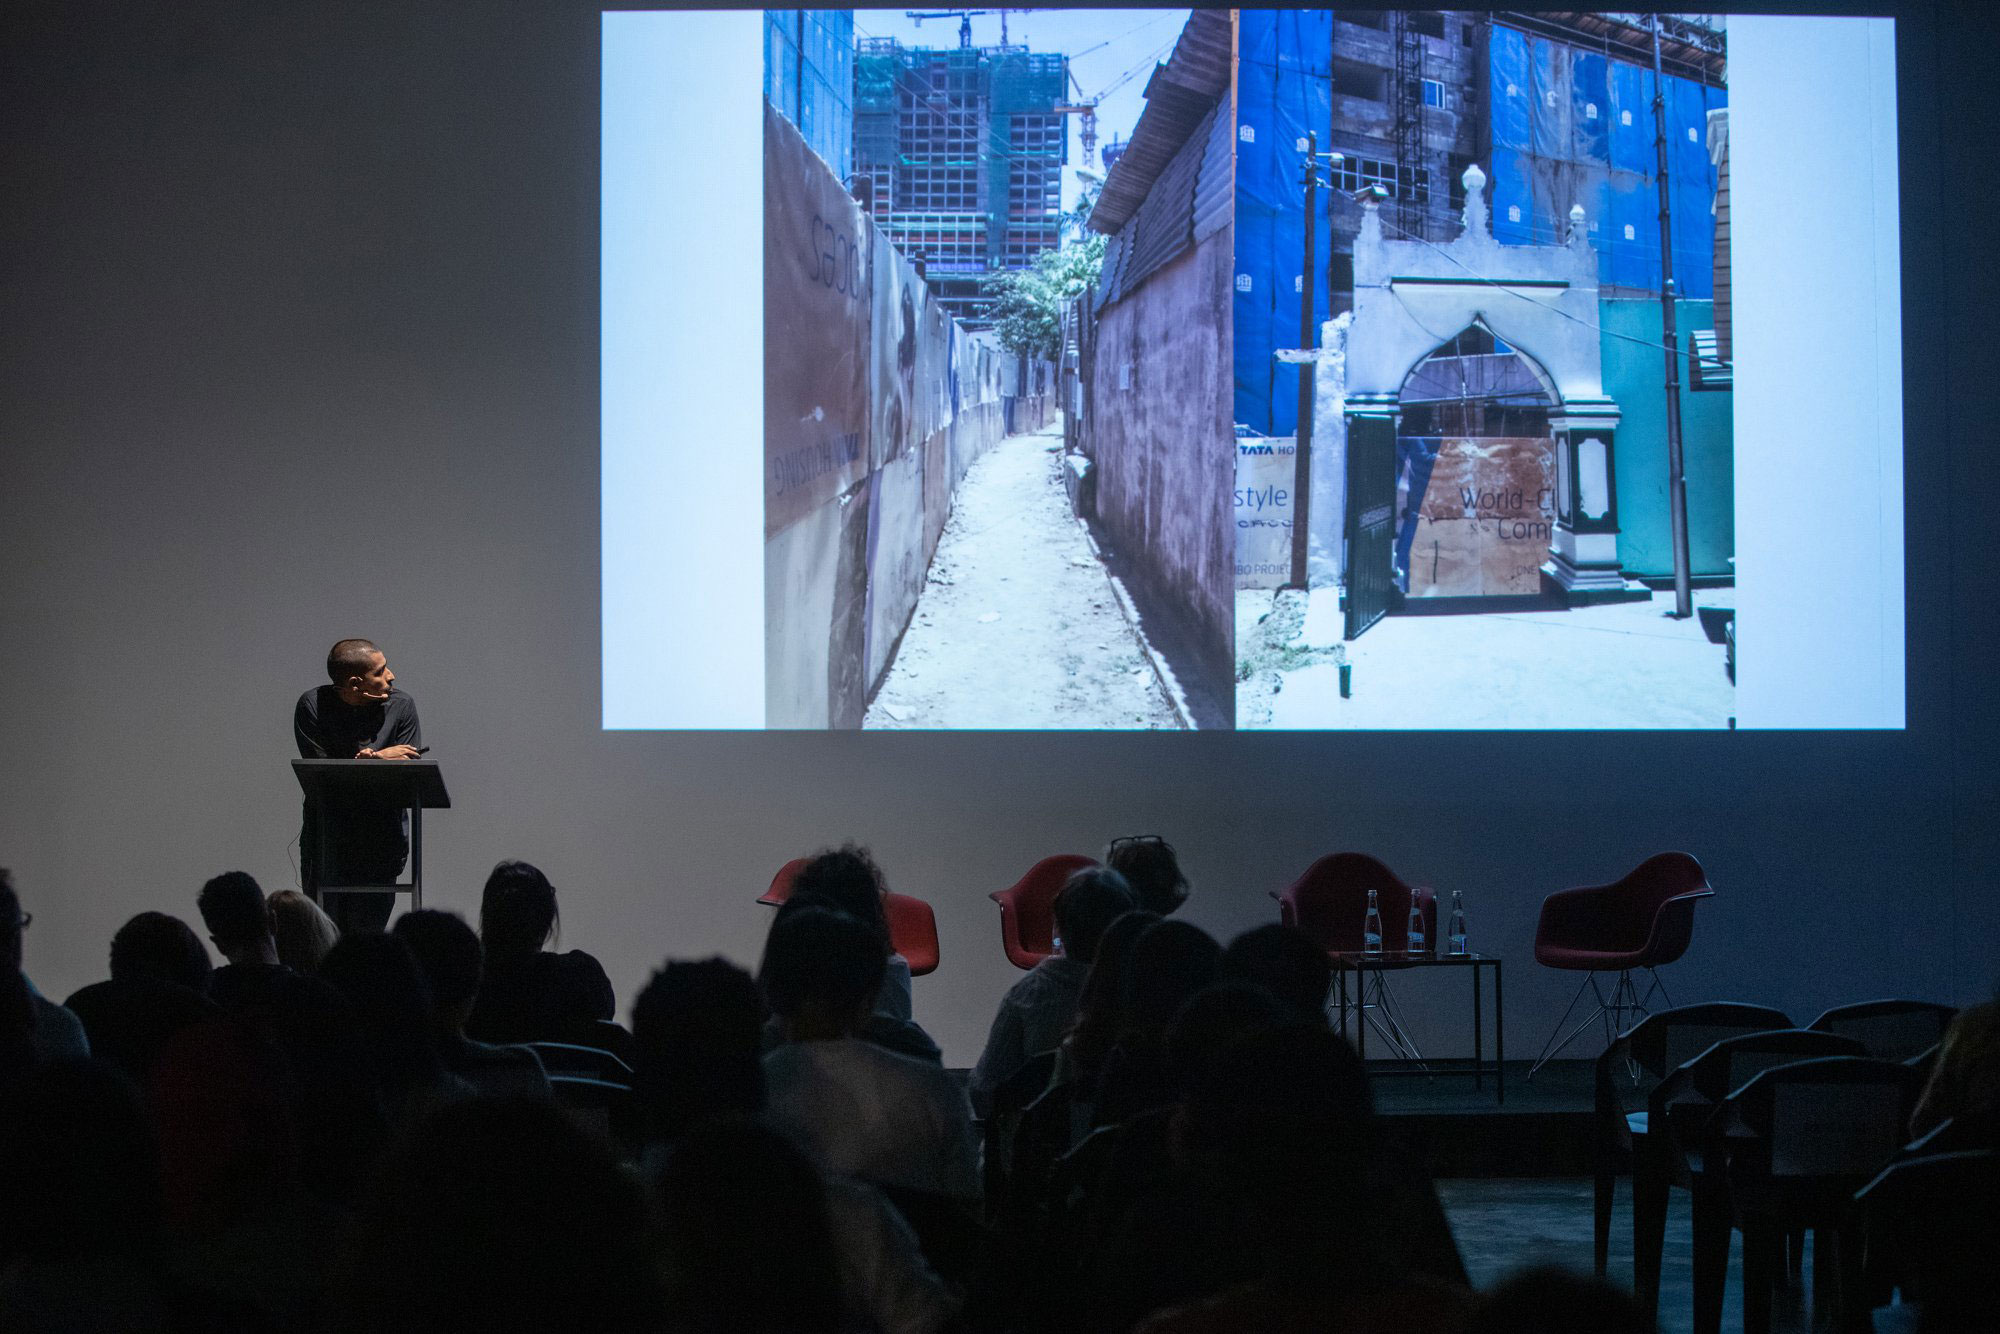 Abdul Halik Azeez presenting Becoming a World Class City: Impressions from Post-War Colombo, at Temporary Spaces, Alserkal Arts Foundation Project Space, Dubai.